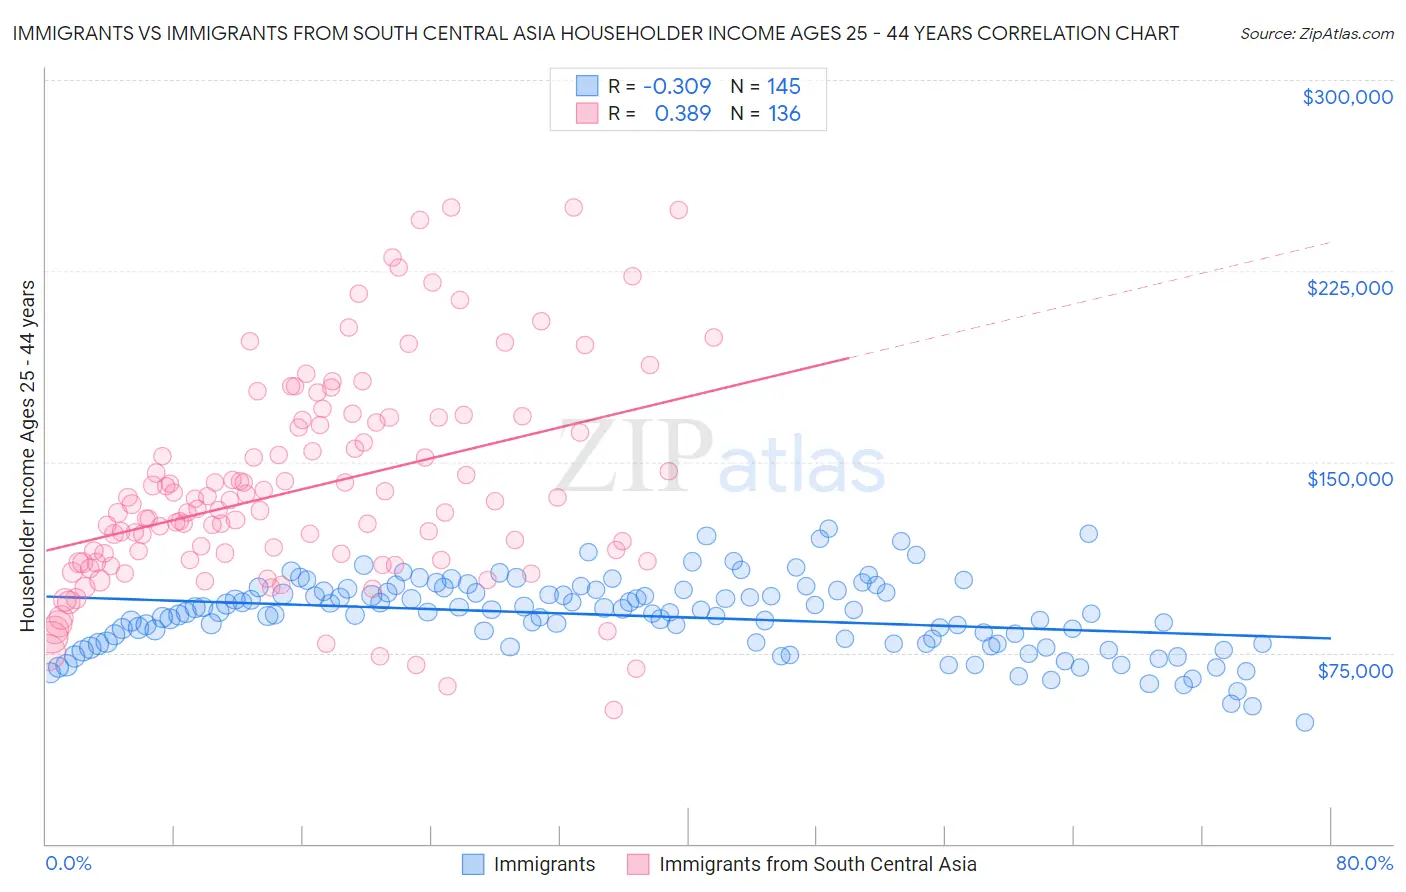 Immigrants vs Immigrants from South Central Asia Householder Income Ages 25 - 44 years